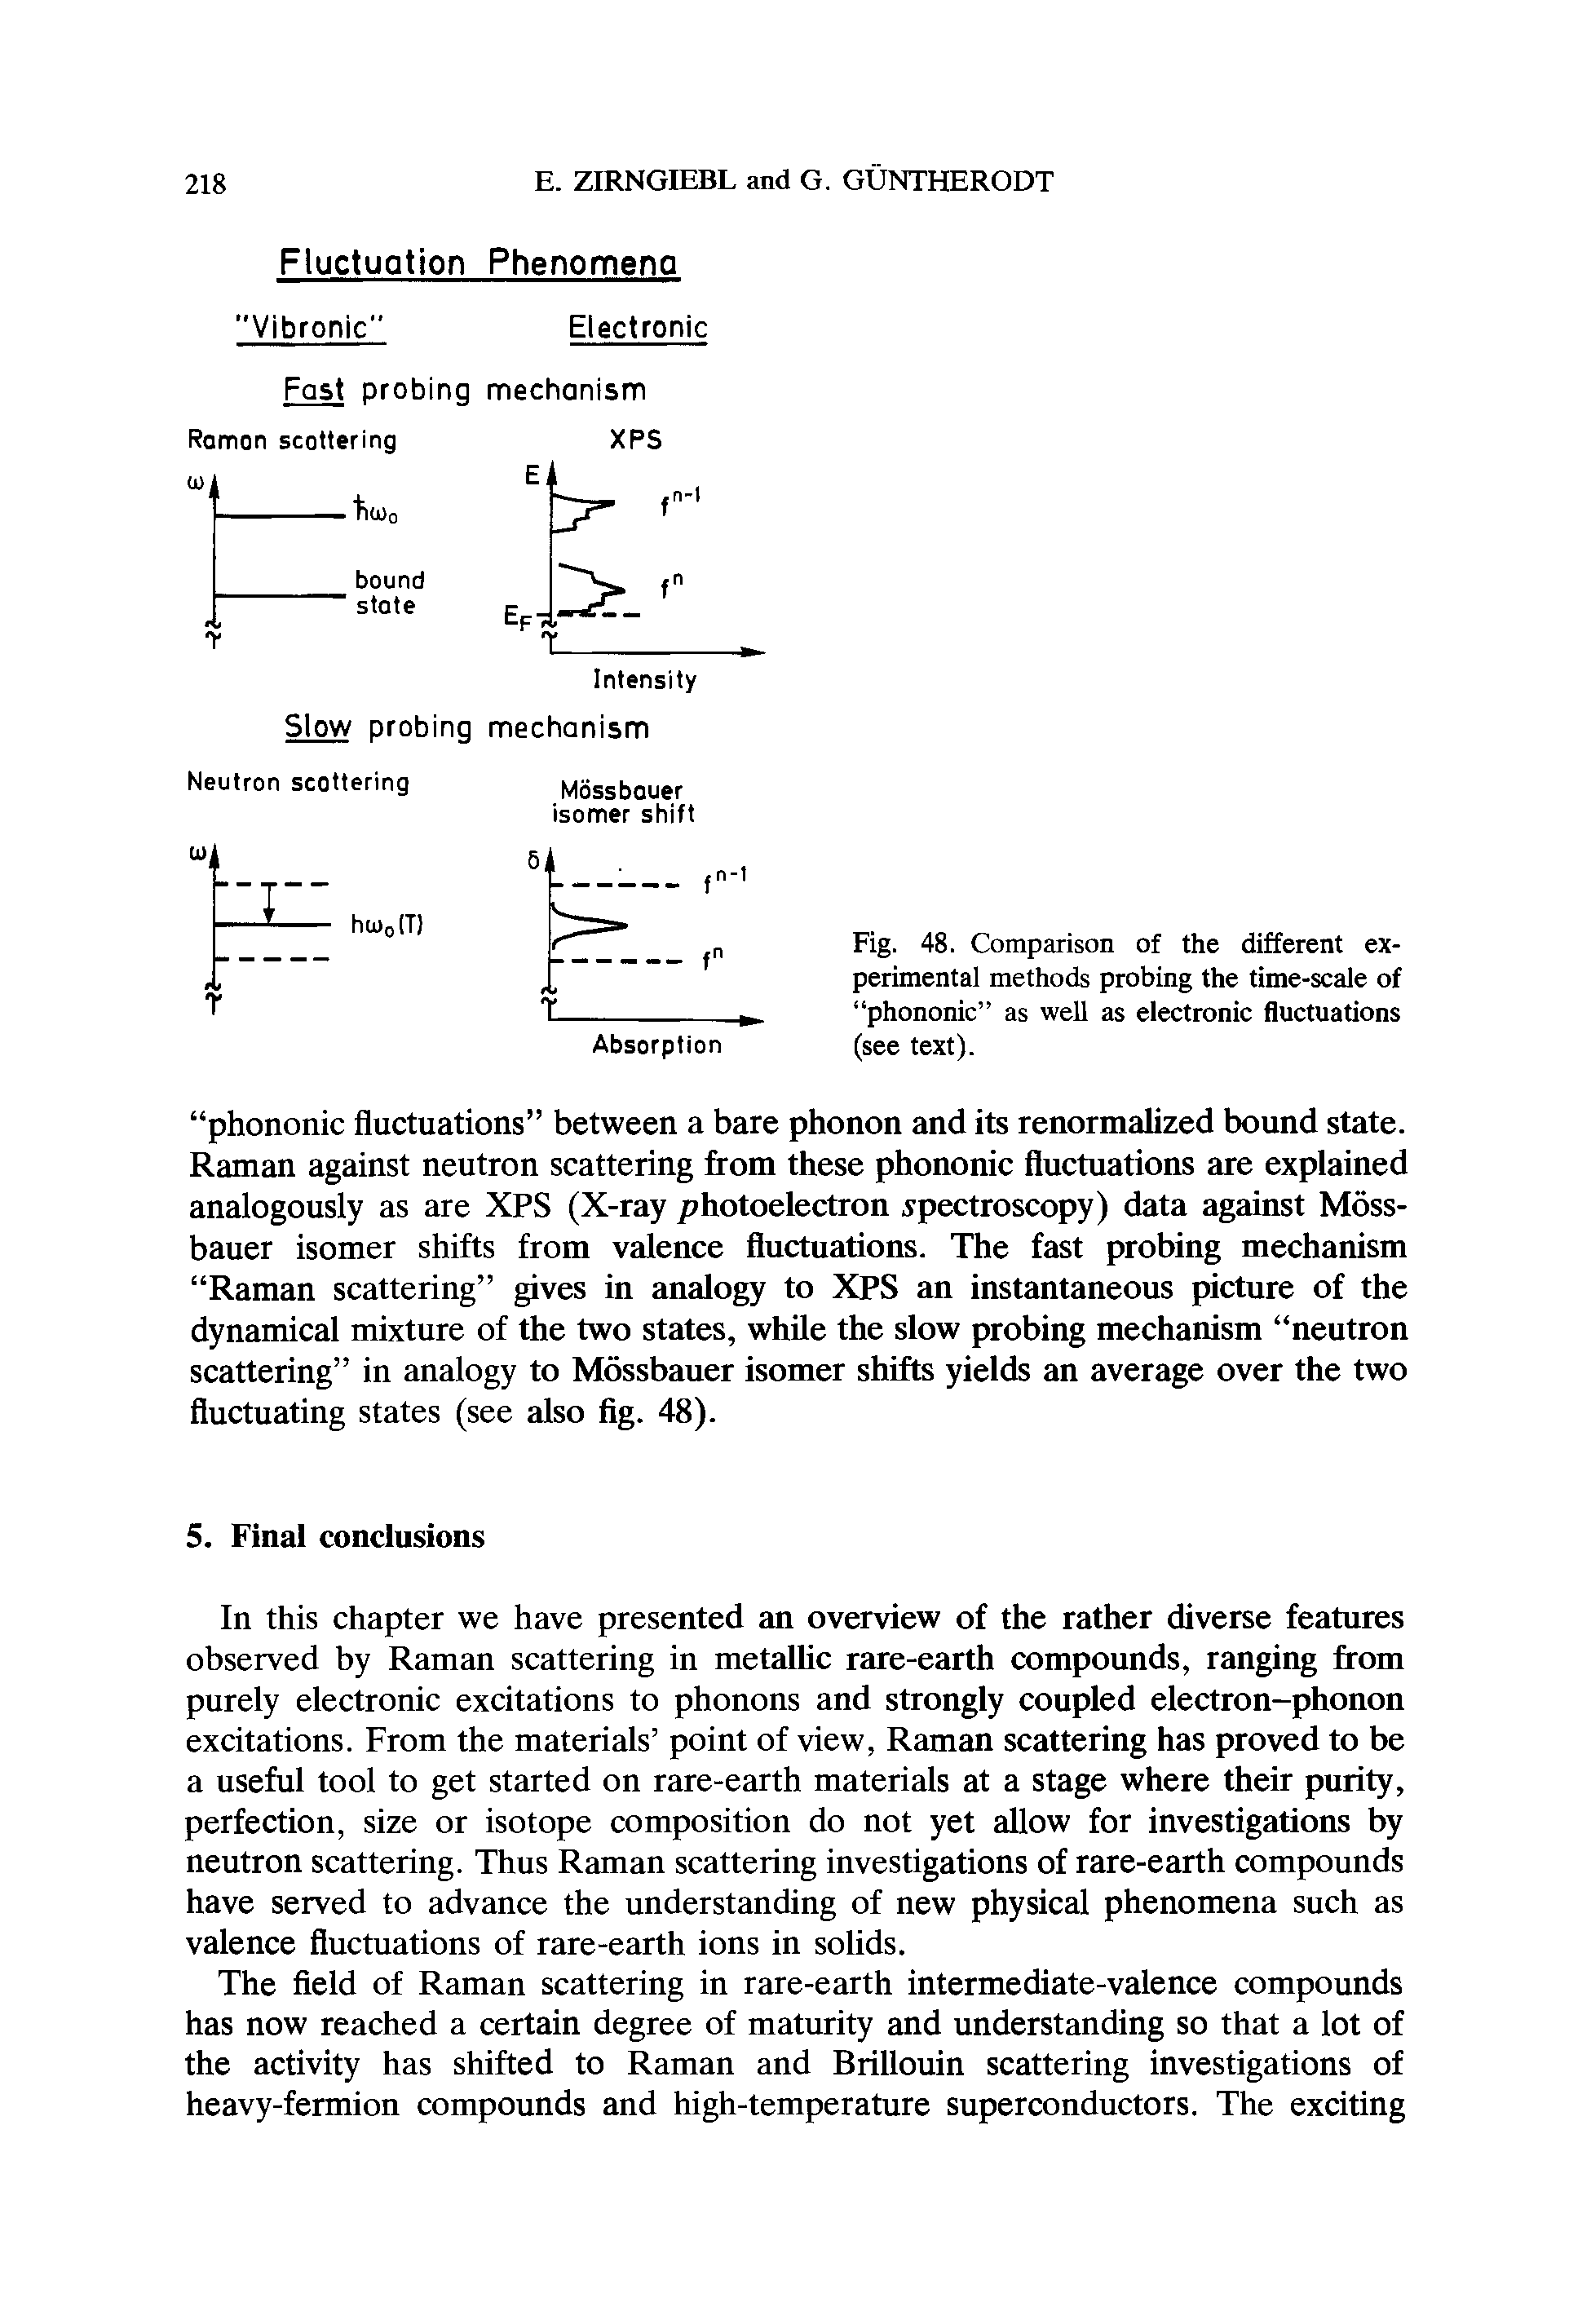 Fig. 48. Comparison of the different experimental methods probing the time-scale of phononic as well as electronic fluctuations (see text).